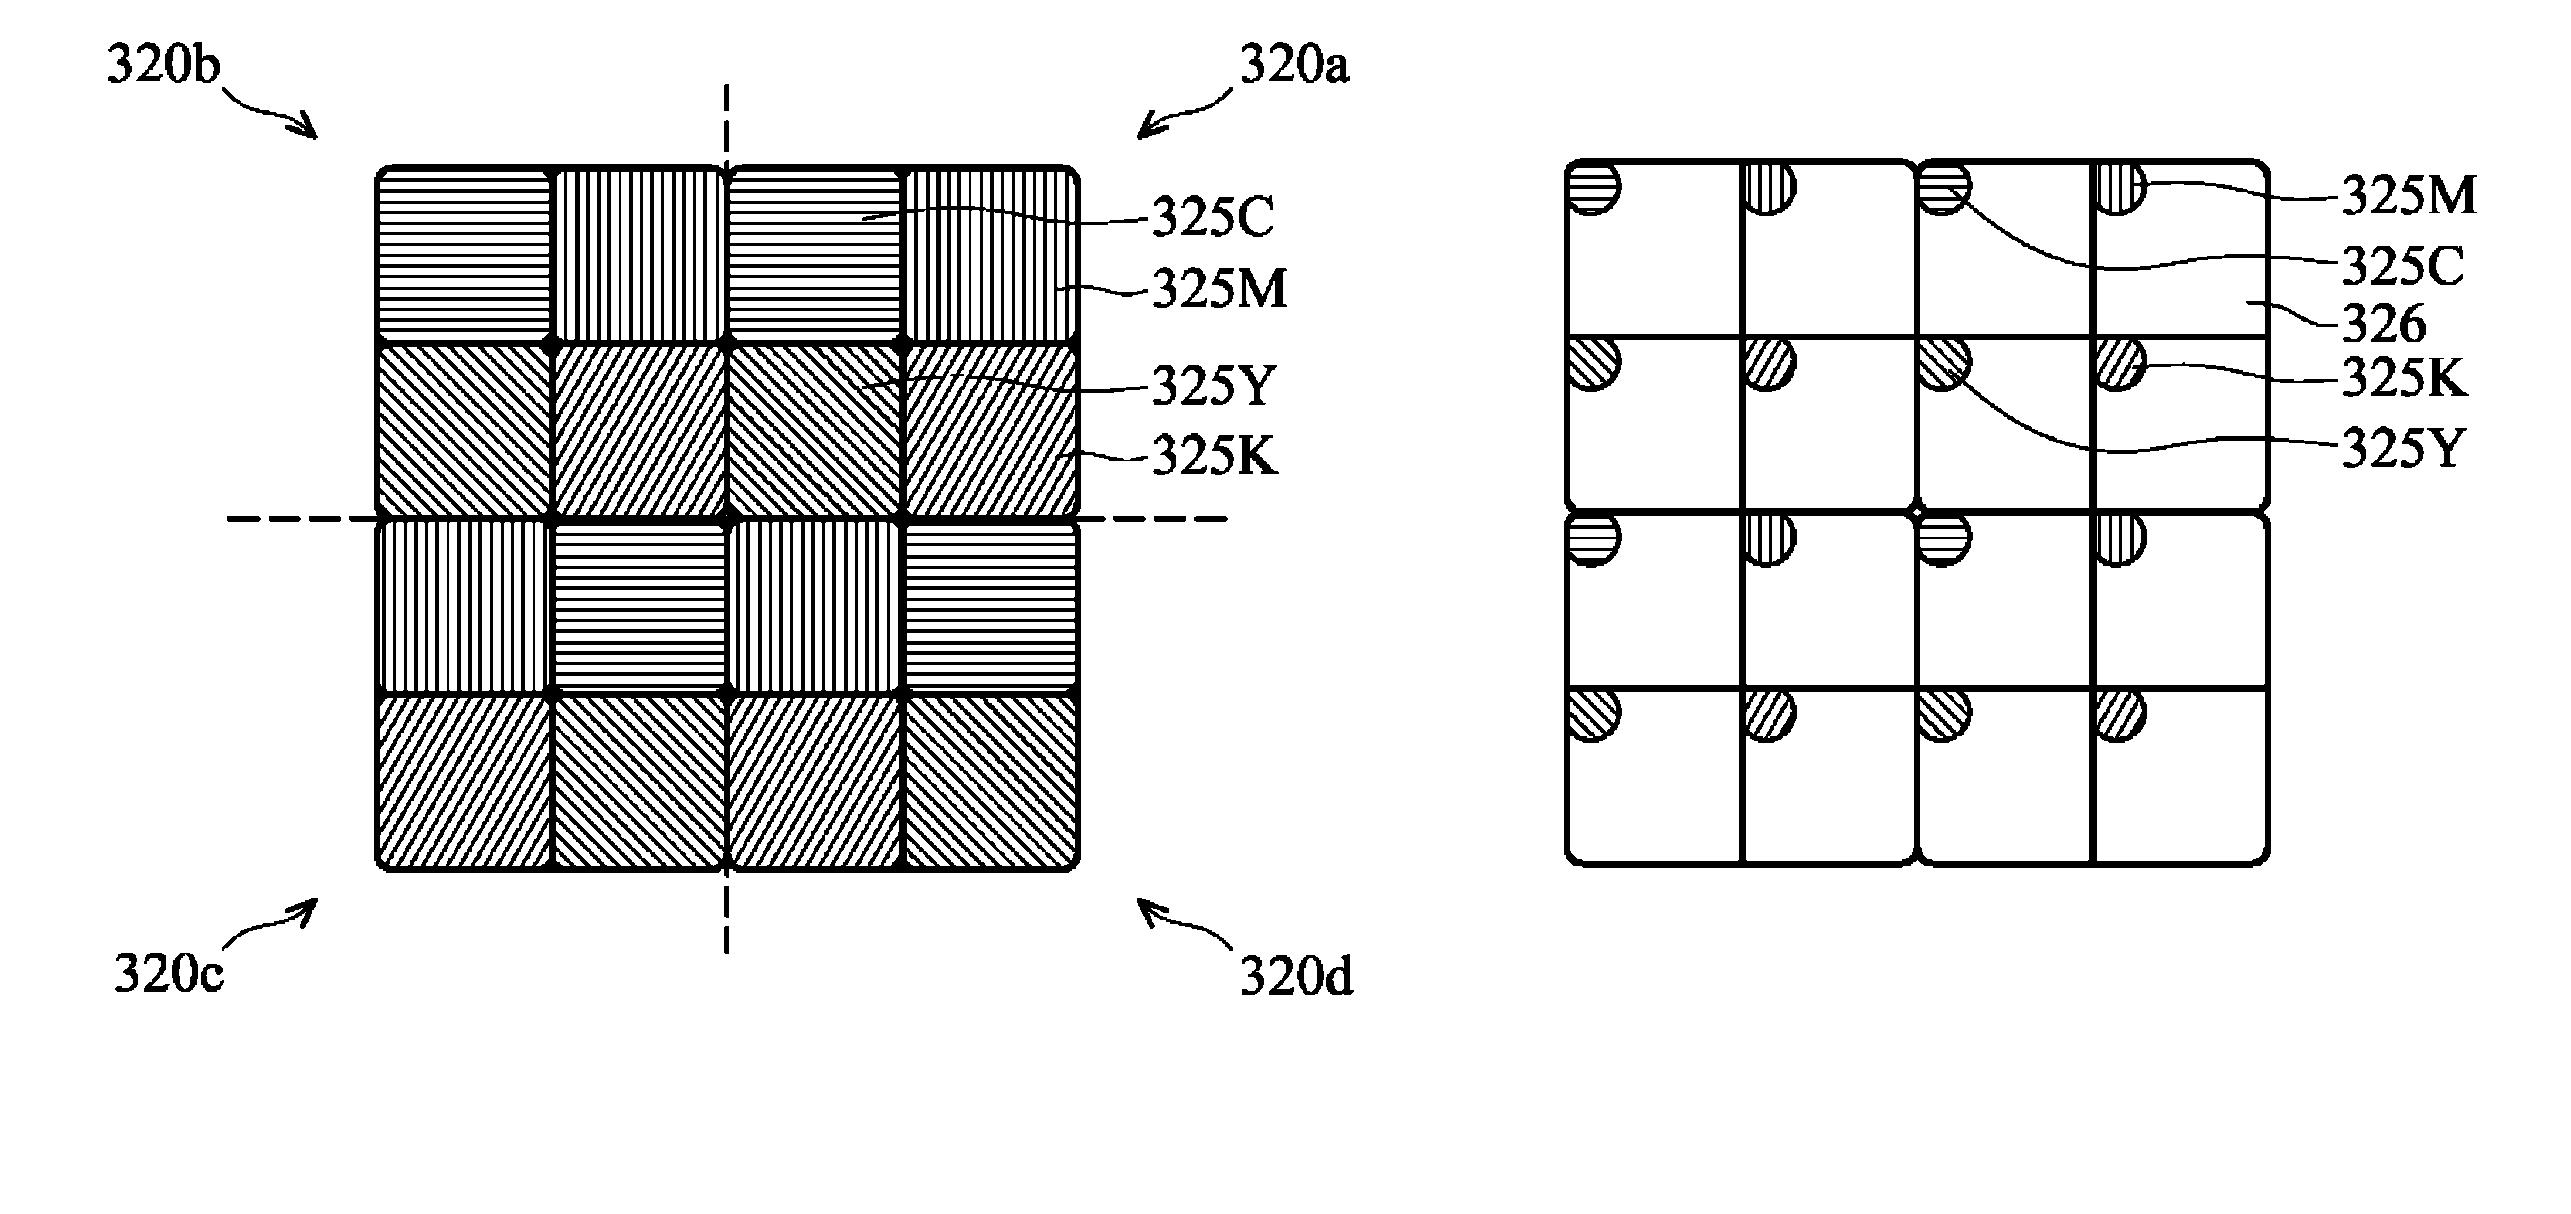 Color electrowetting display (EWD) devices